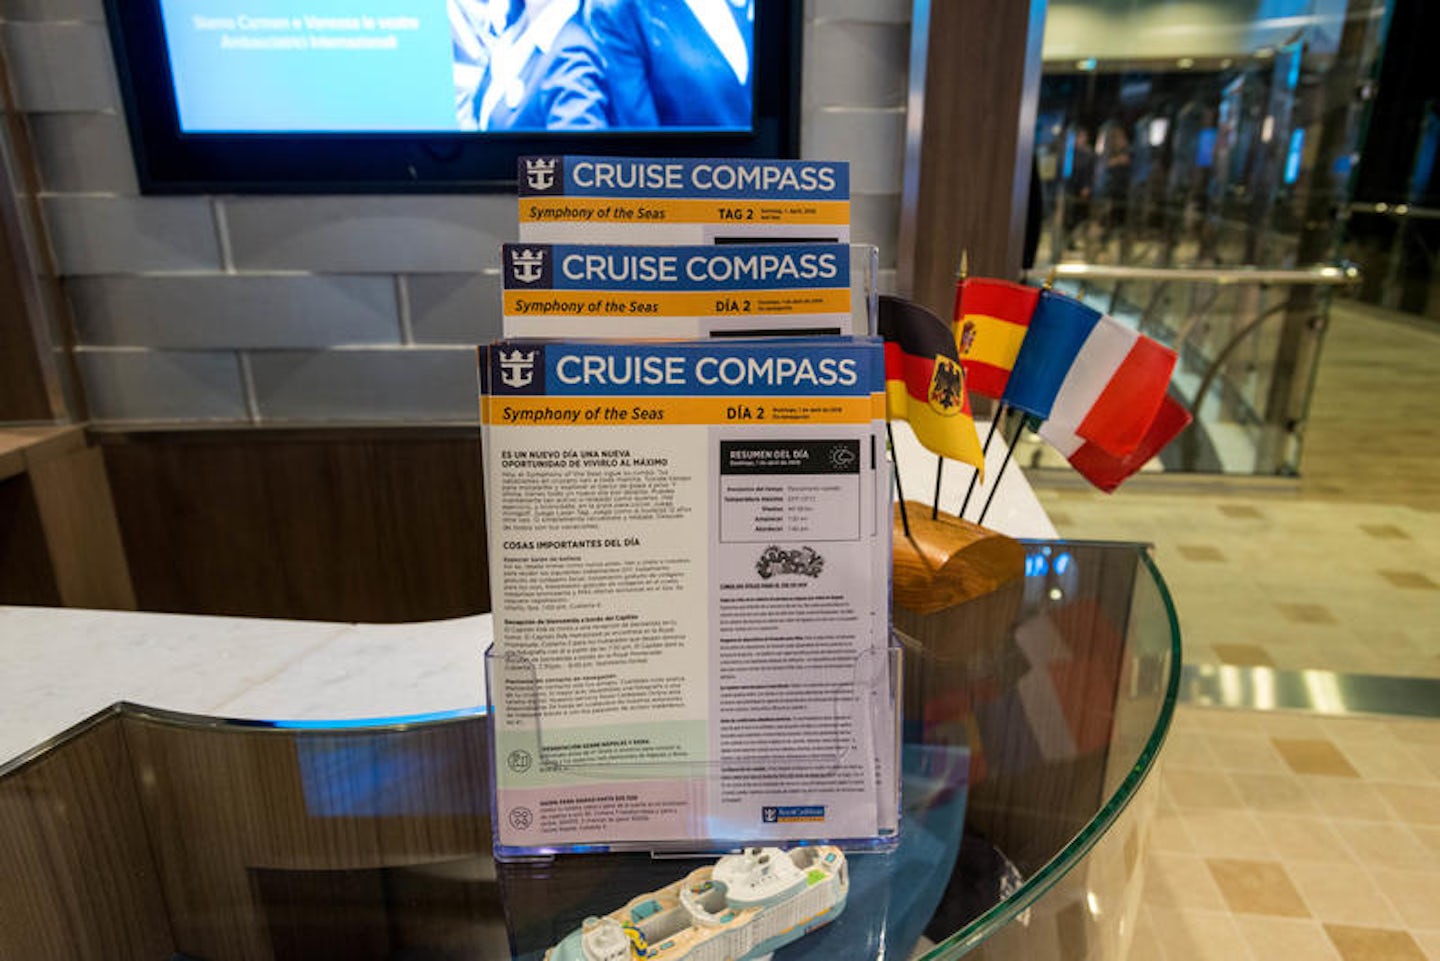 Shore Excursions on Symphony of the Seas